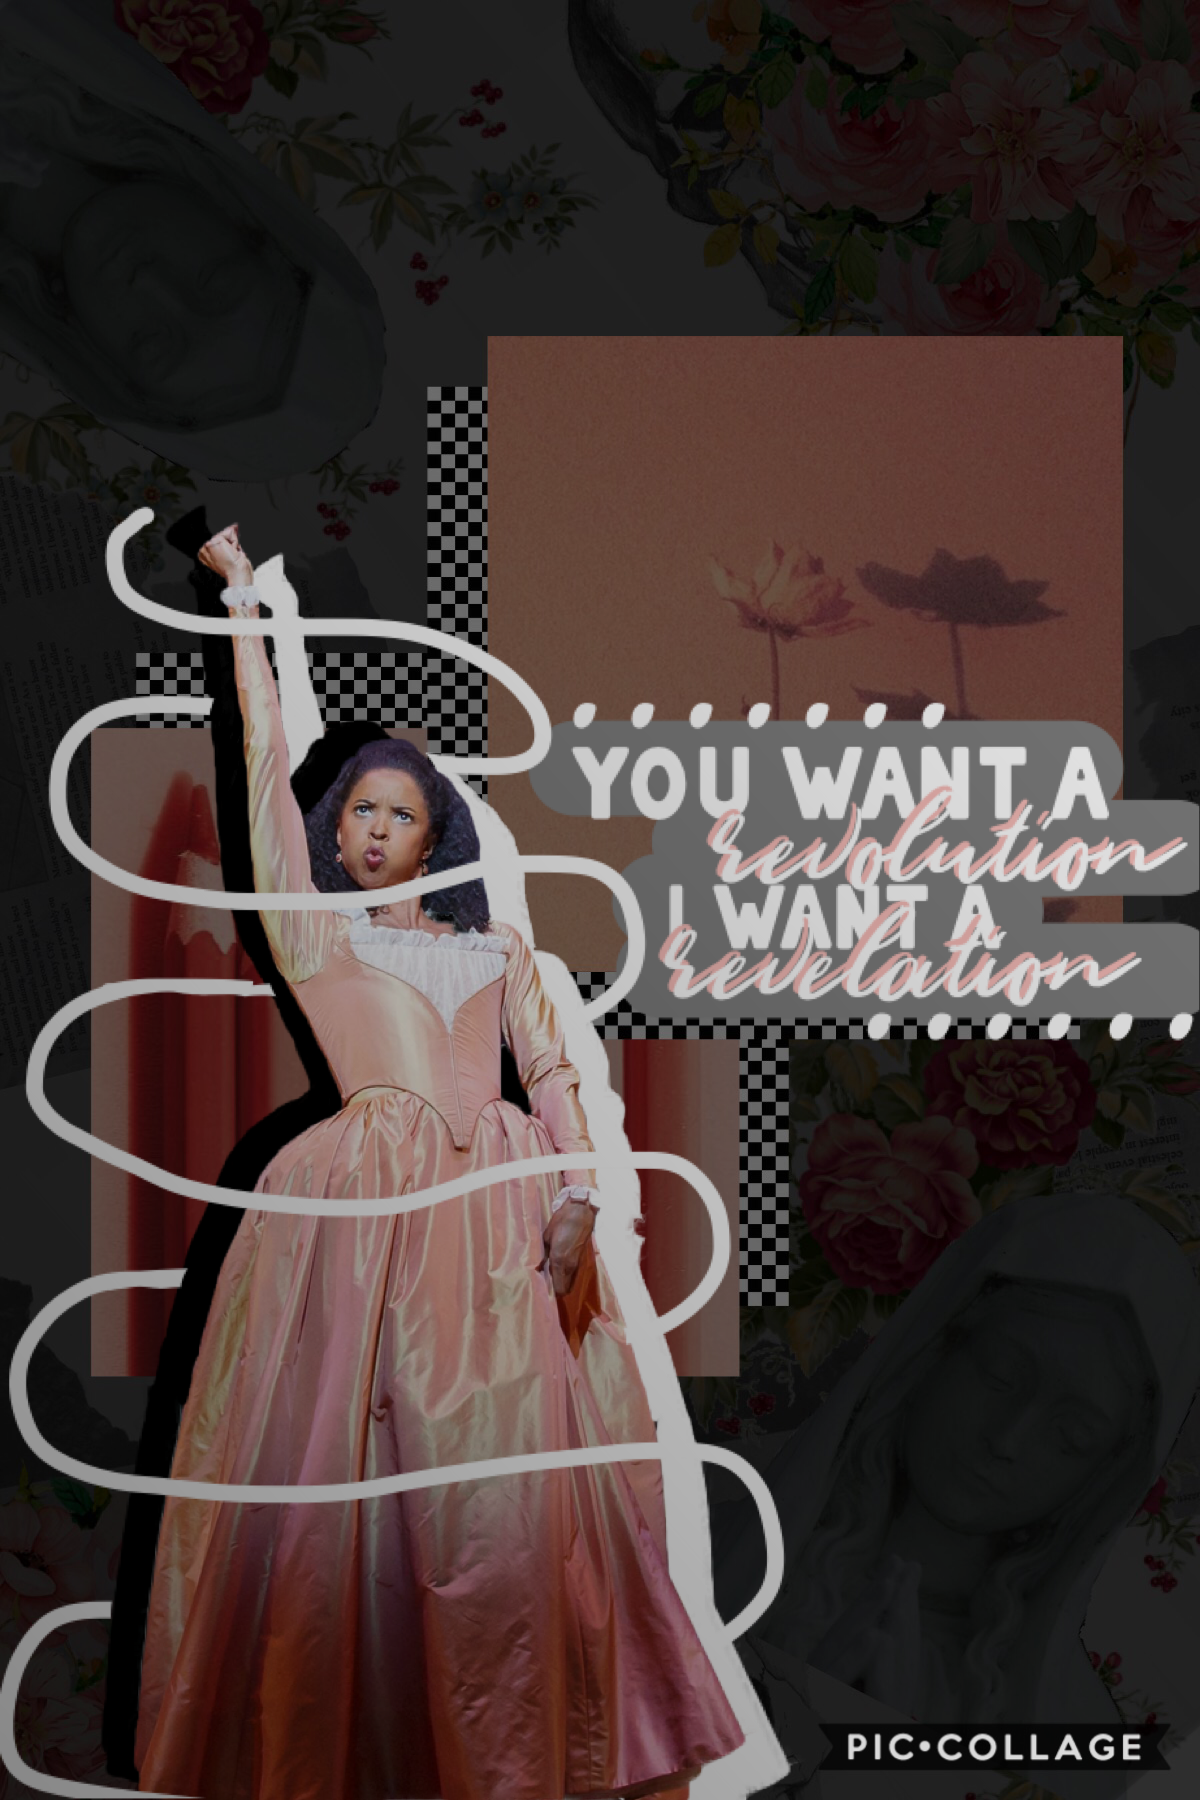 so listen to my declaration 
this is a redo of a collage I did a loooooong time ago that got featured!! 
I think this is better than that one but 🤭👀
I can’t decide if I like the wraparound doodle things or not 

:/